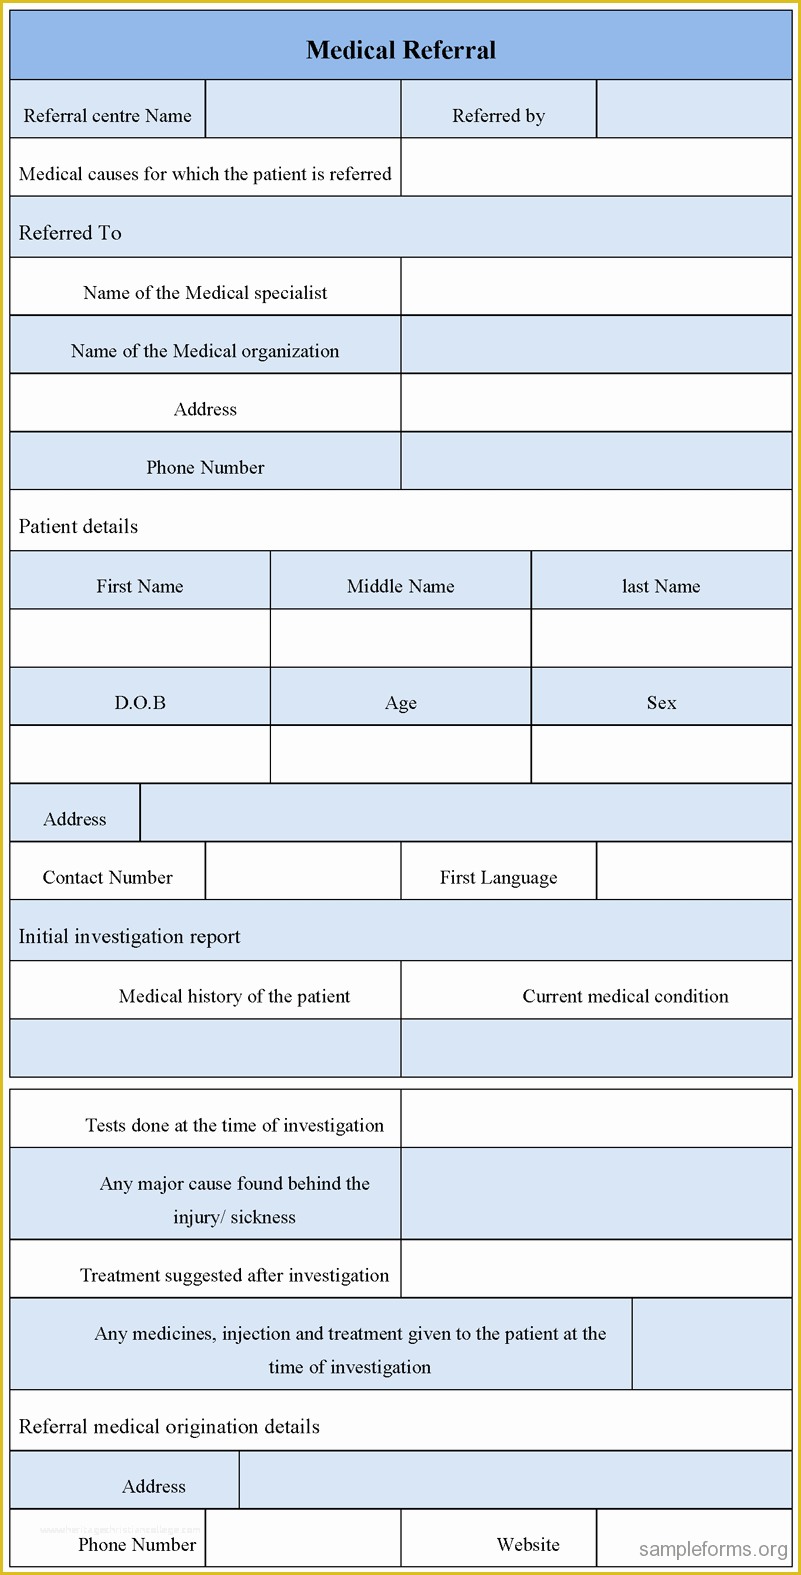 Medical Referral form Template Free Of Medical Referral form Sample forms